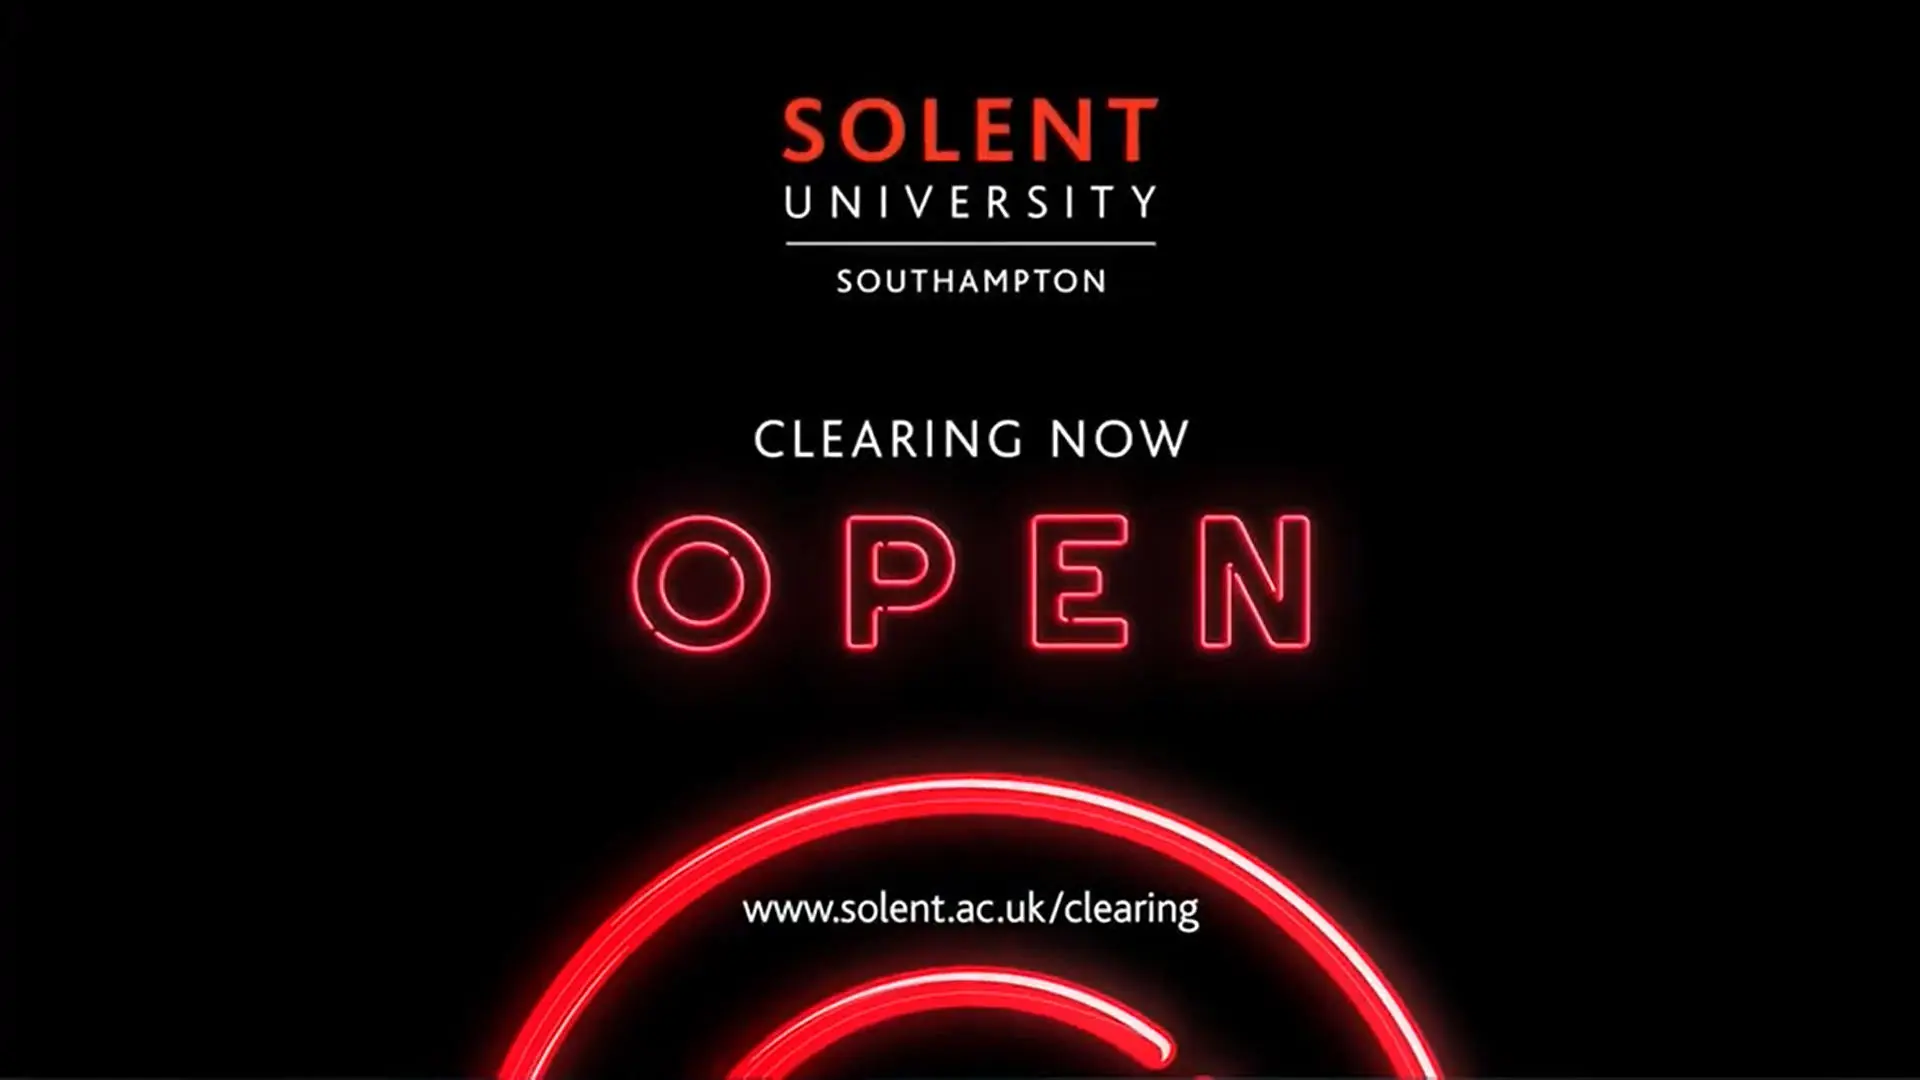 Image with a dark background and on top is the Solent Uni logo, 'Clearing now open', 'www.solent.ac.uk'. 